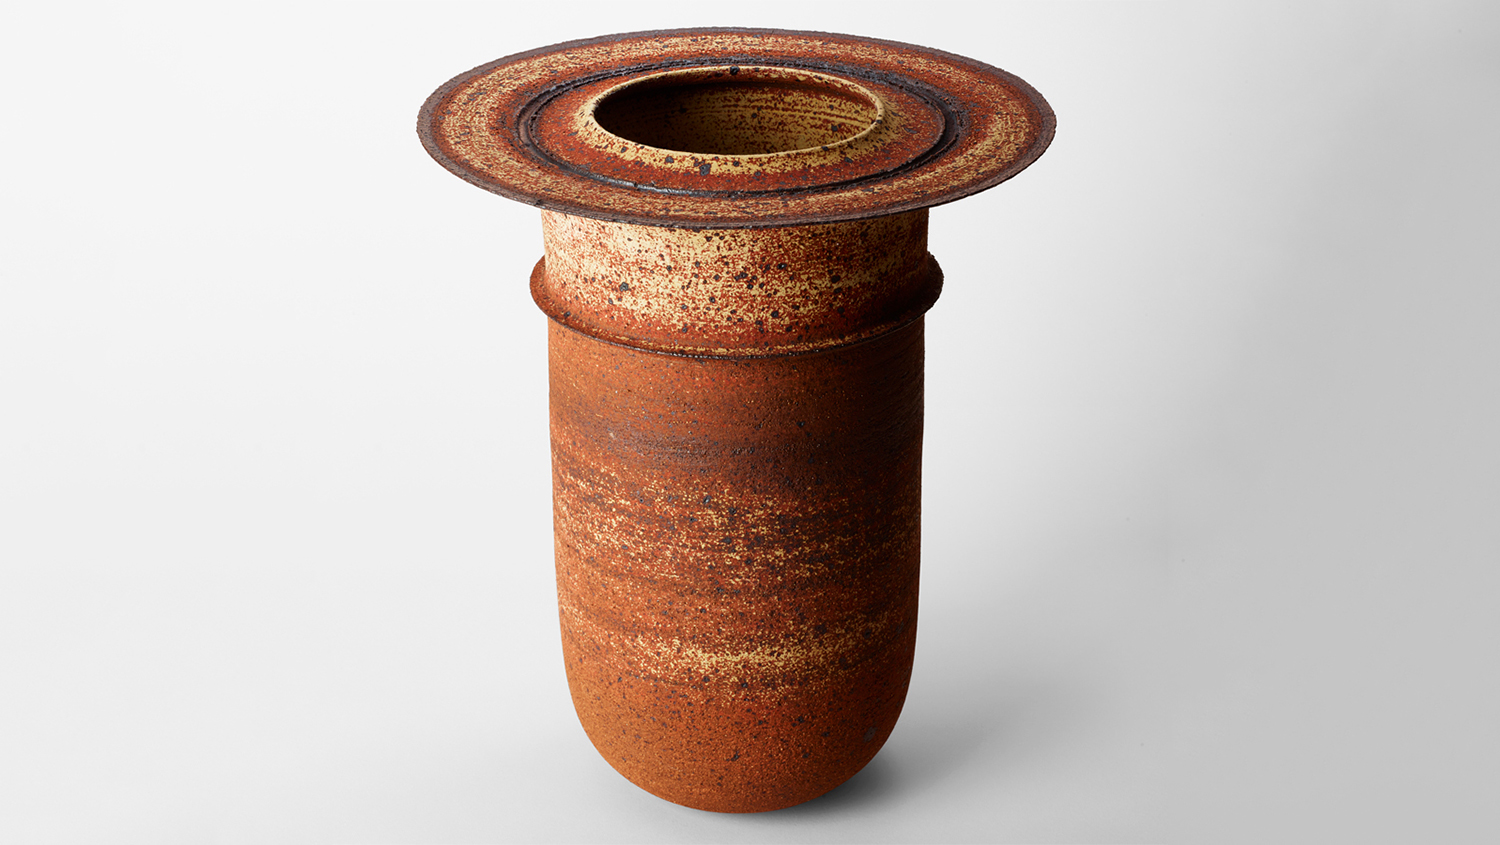   Thrown Stoneware Form   by Ray Silverman  